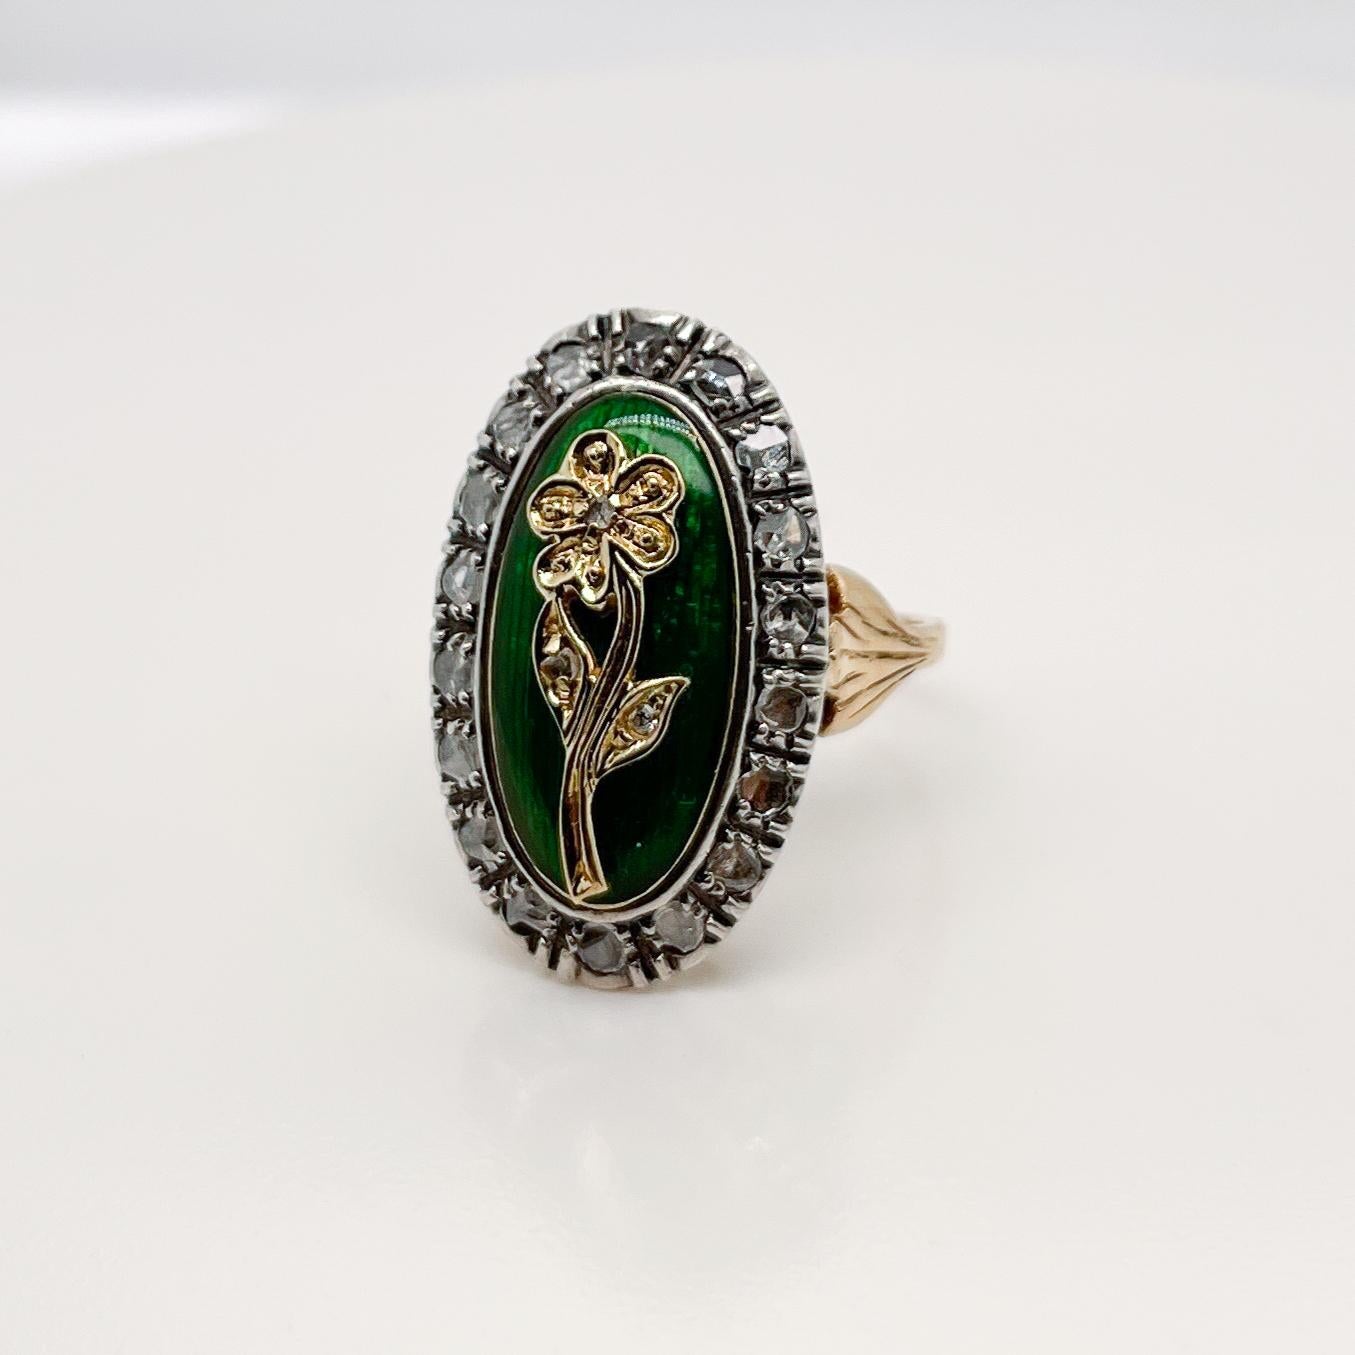 A very fine vintage enamel cocktail ring.

In 14k gold with a gold flower on green guilloche enamel cushion. 

The gold flower is set with small accent rose cut accent diamonds, and the entire head is framed in halo of rose cut diamonds. 

The base